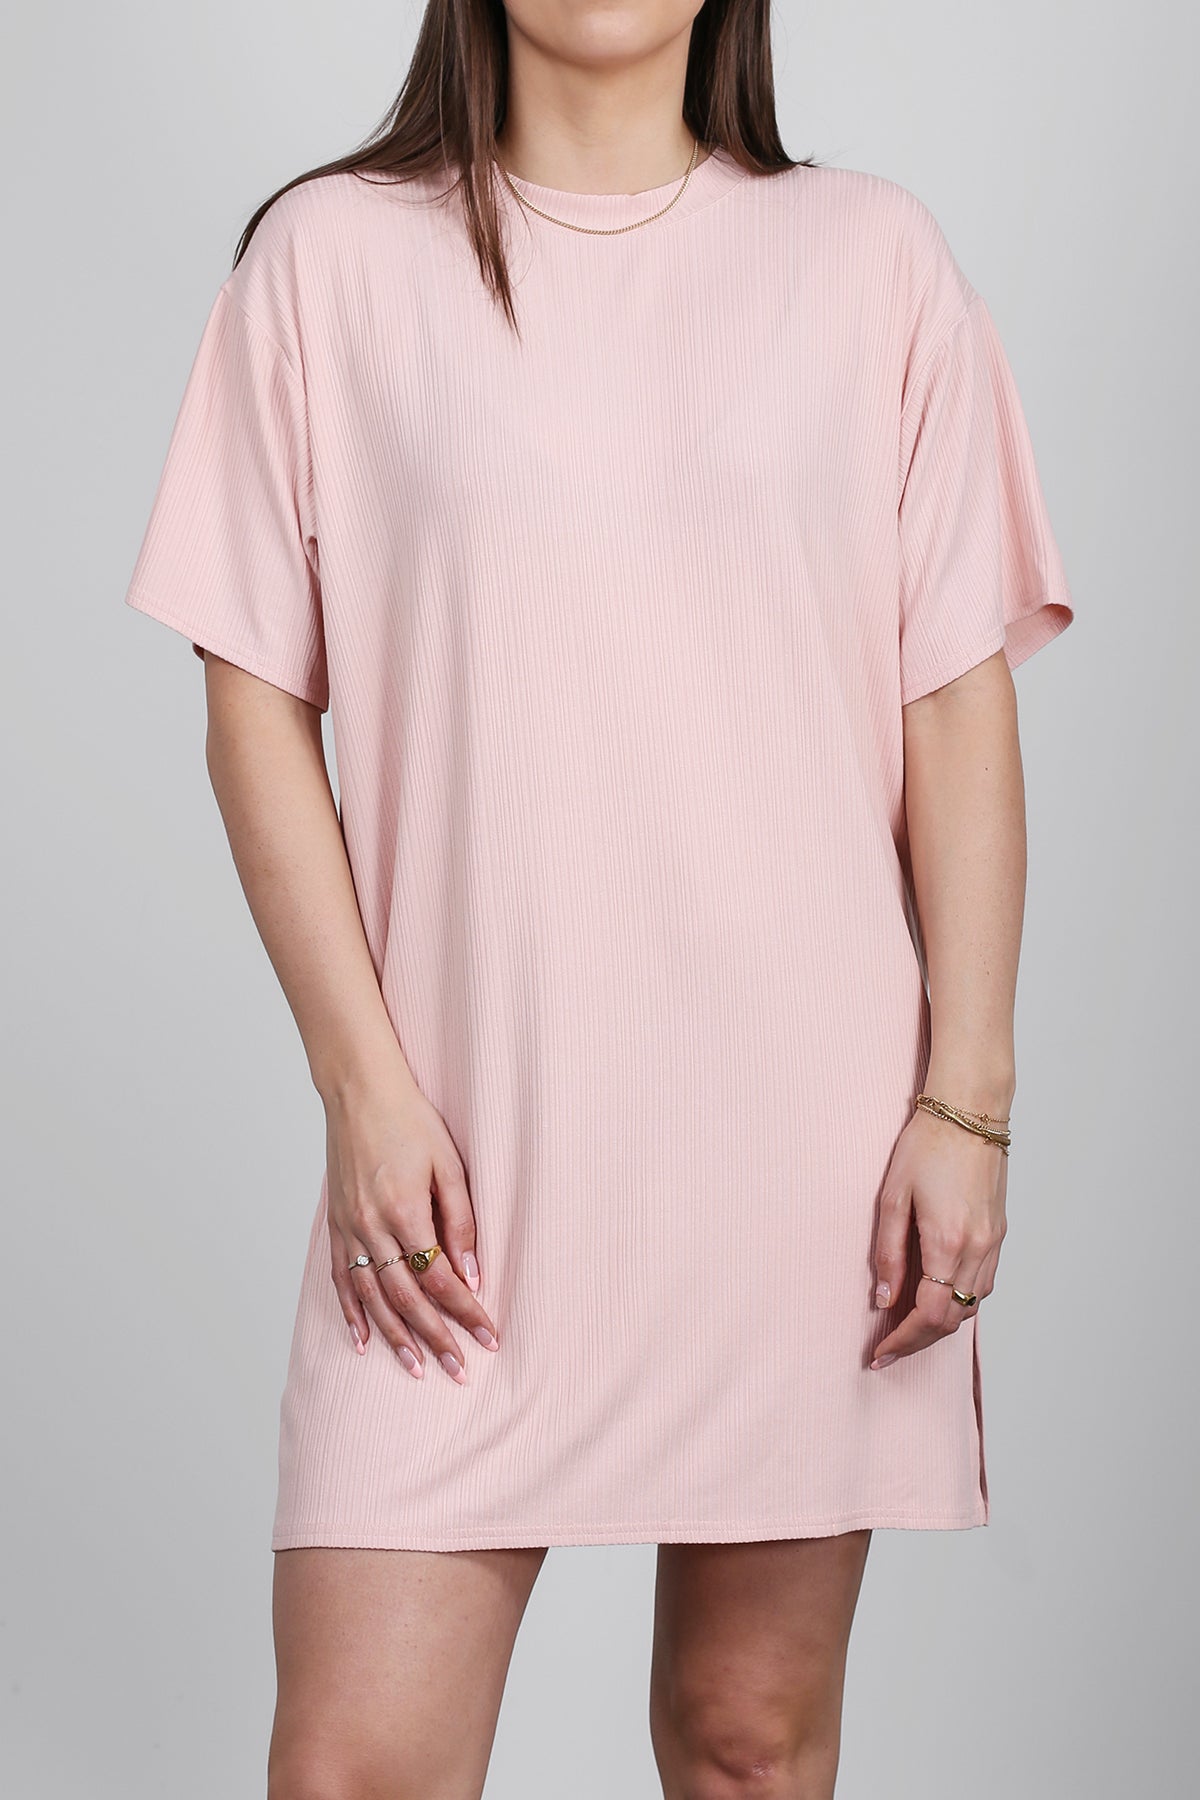 RIBBED TEE DRESS IN SOFT PEACH